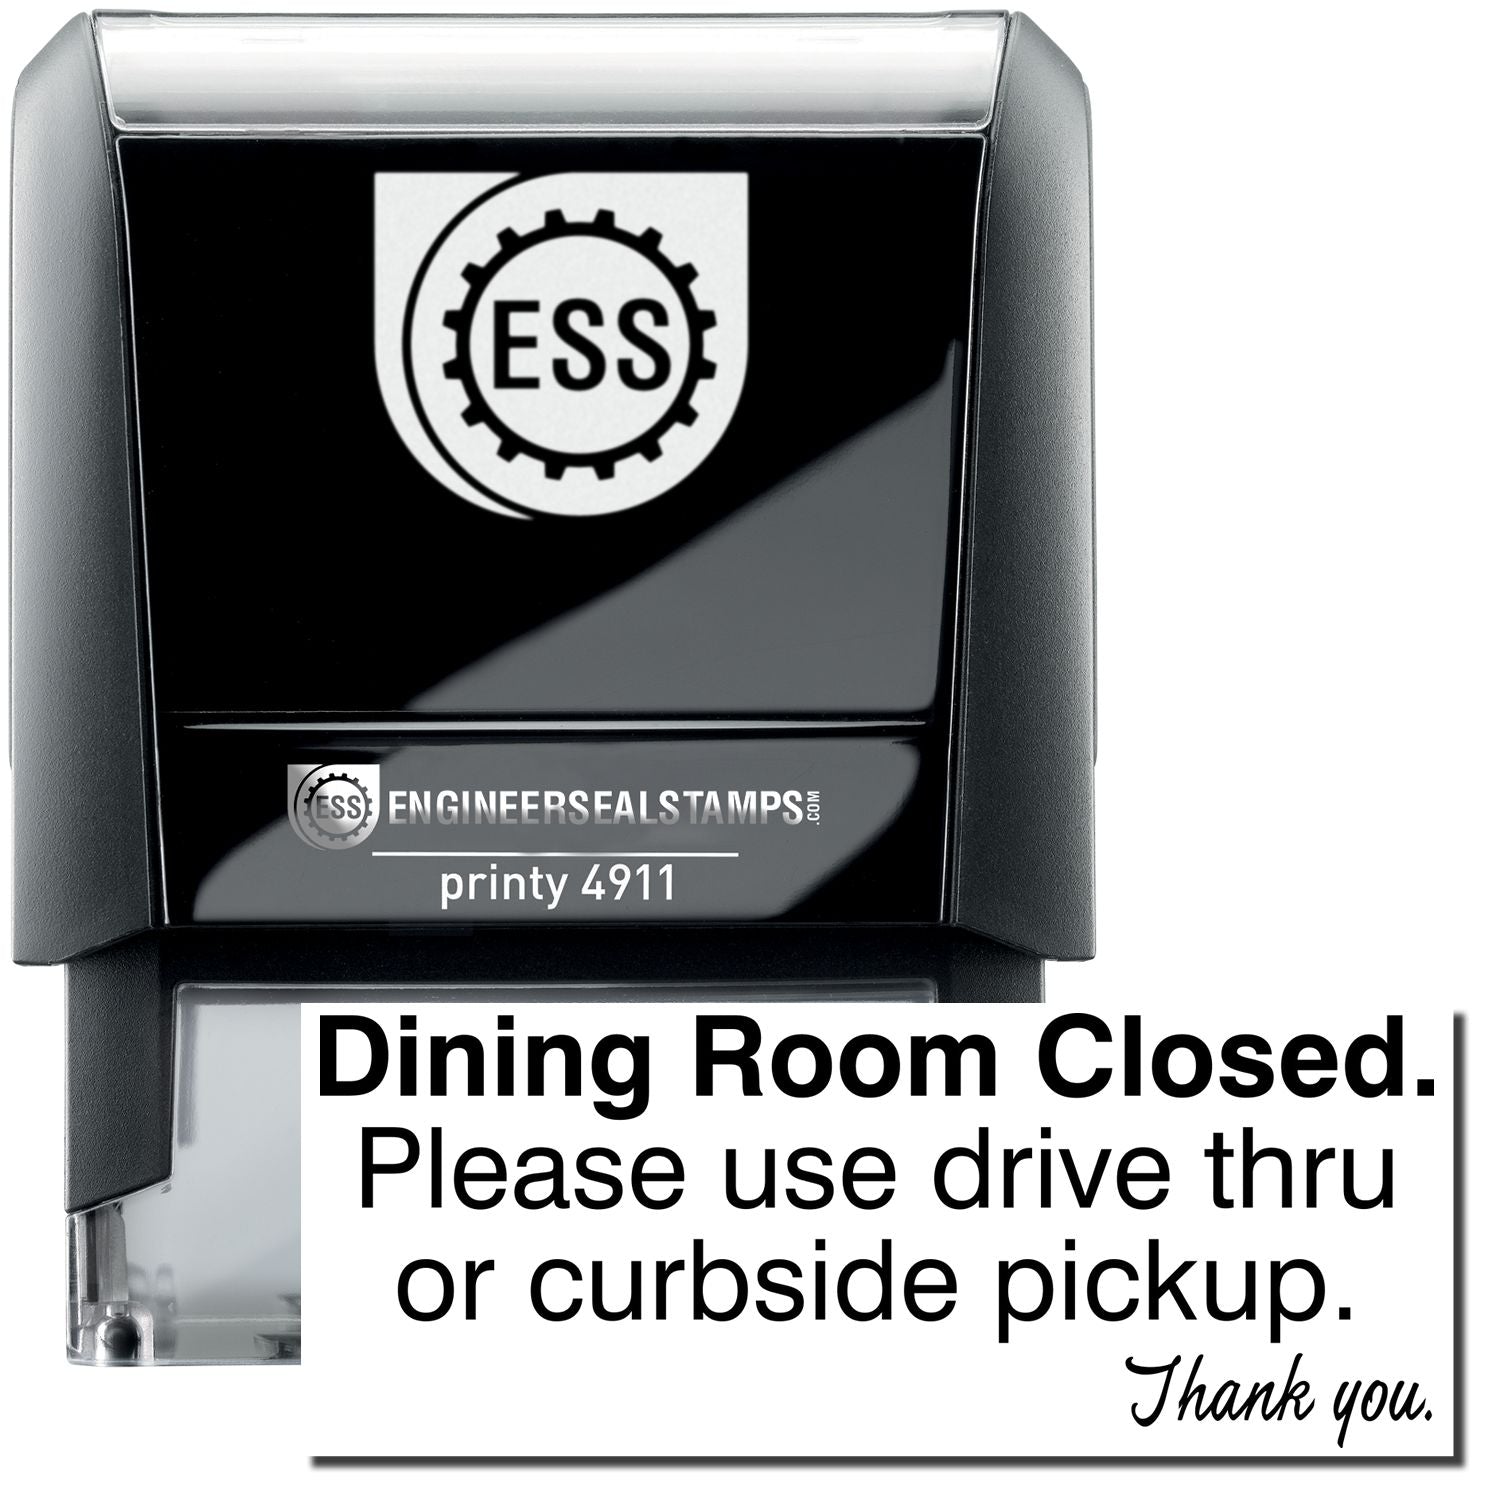 A self-inking stamp with a stamped image showing how the text "Dining Room Closed. Please use drive thru or curbside pickup. Thank you." is displayed after stamping.